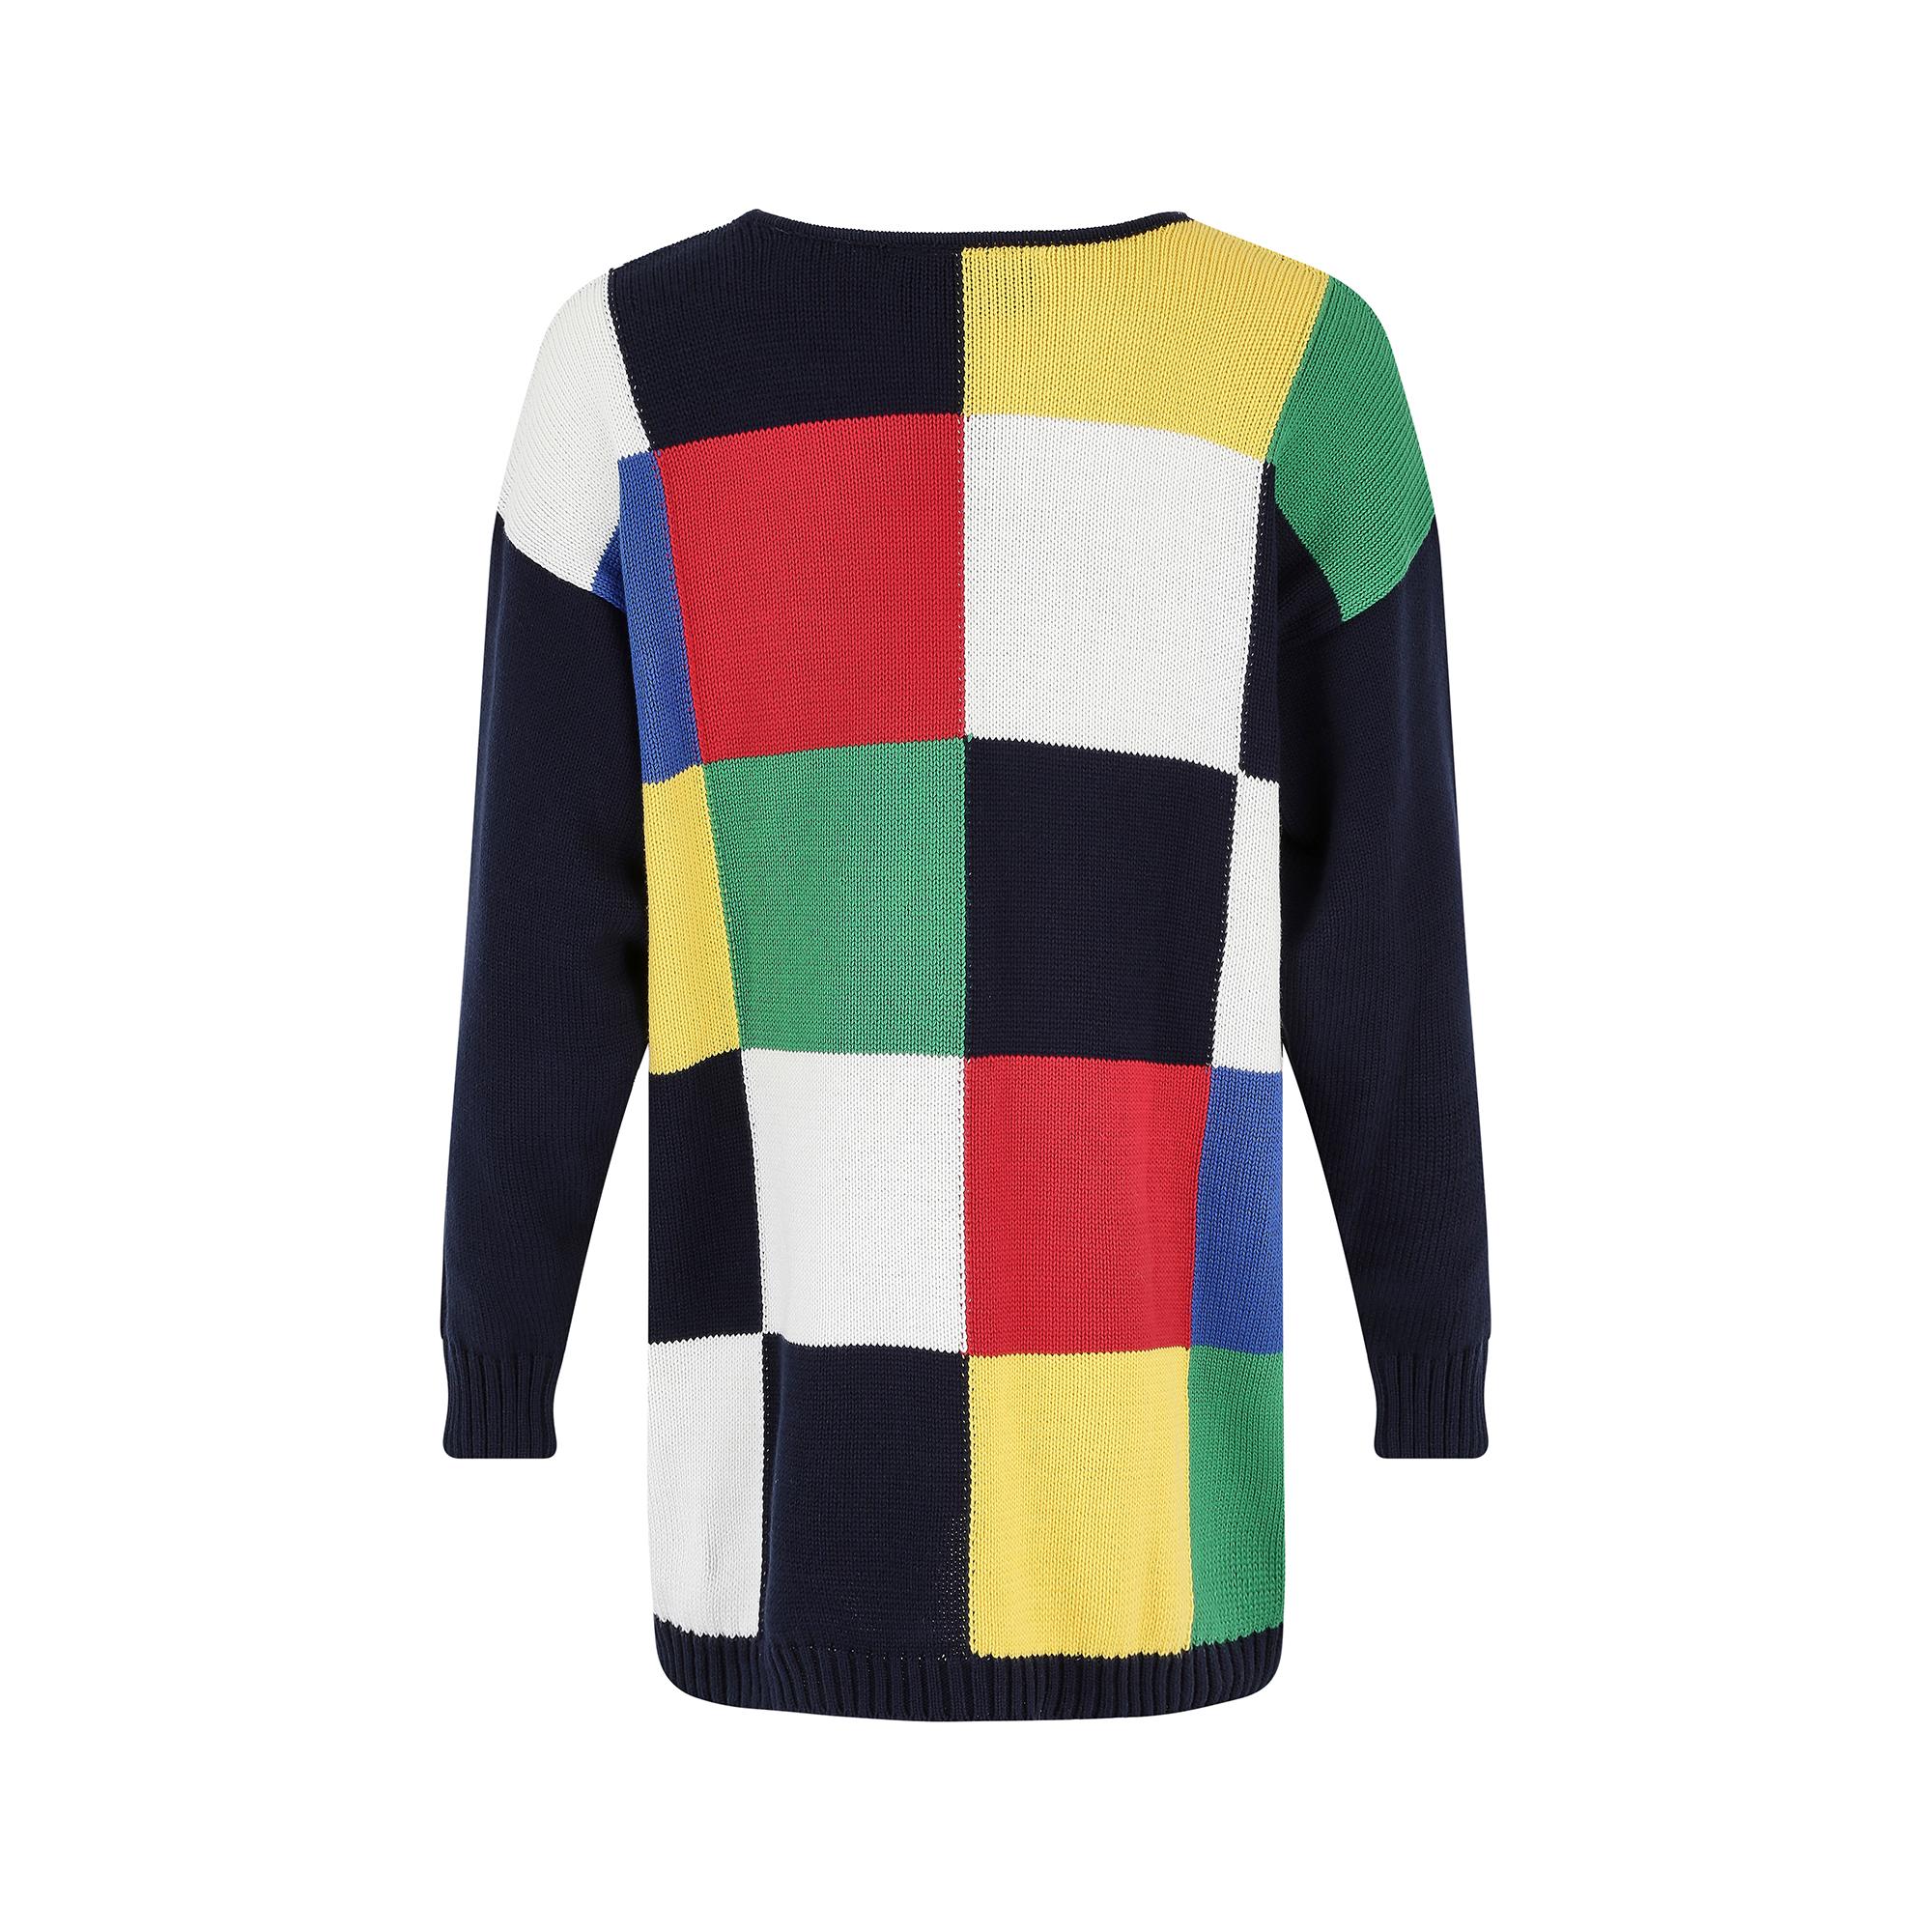 Circa late 1980s to early 1990s Jean-Charles de Castelbajac knitted cotton sweater.  The Moroccan born French designer is best known for his pop art inspired fashion designs, specifically his artistic relationship and collaborations with Keith